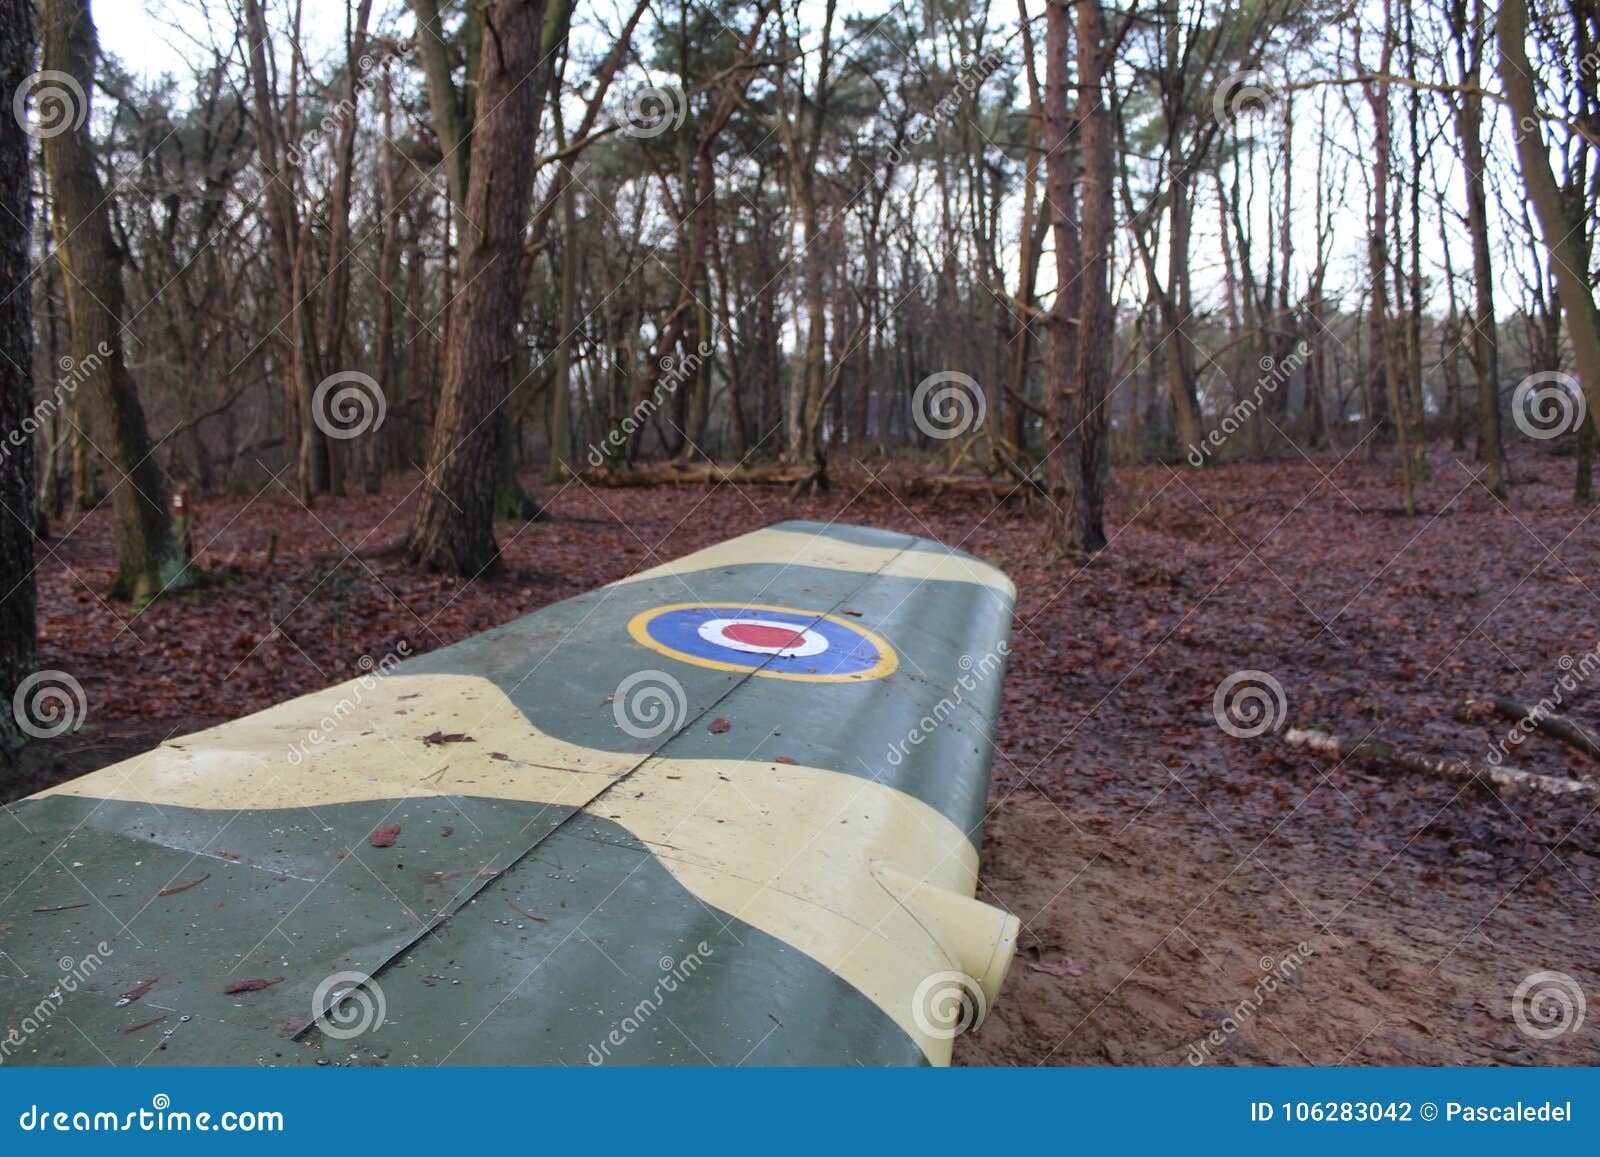 The Wing Of A Plane In A Forest Stock Photo - Image of amazing, wing